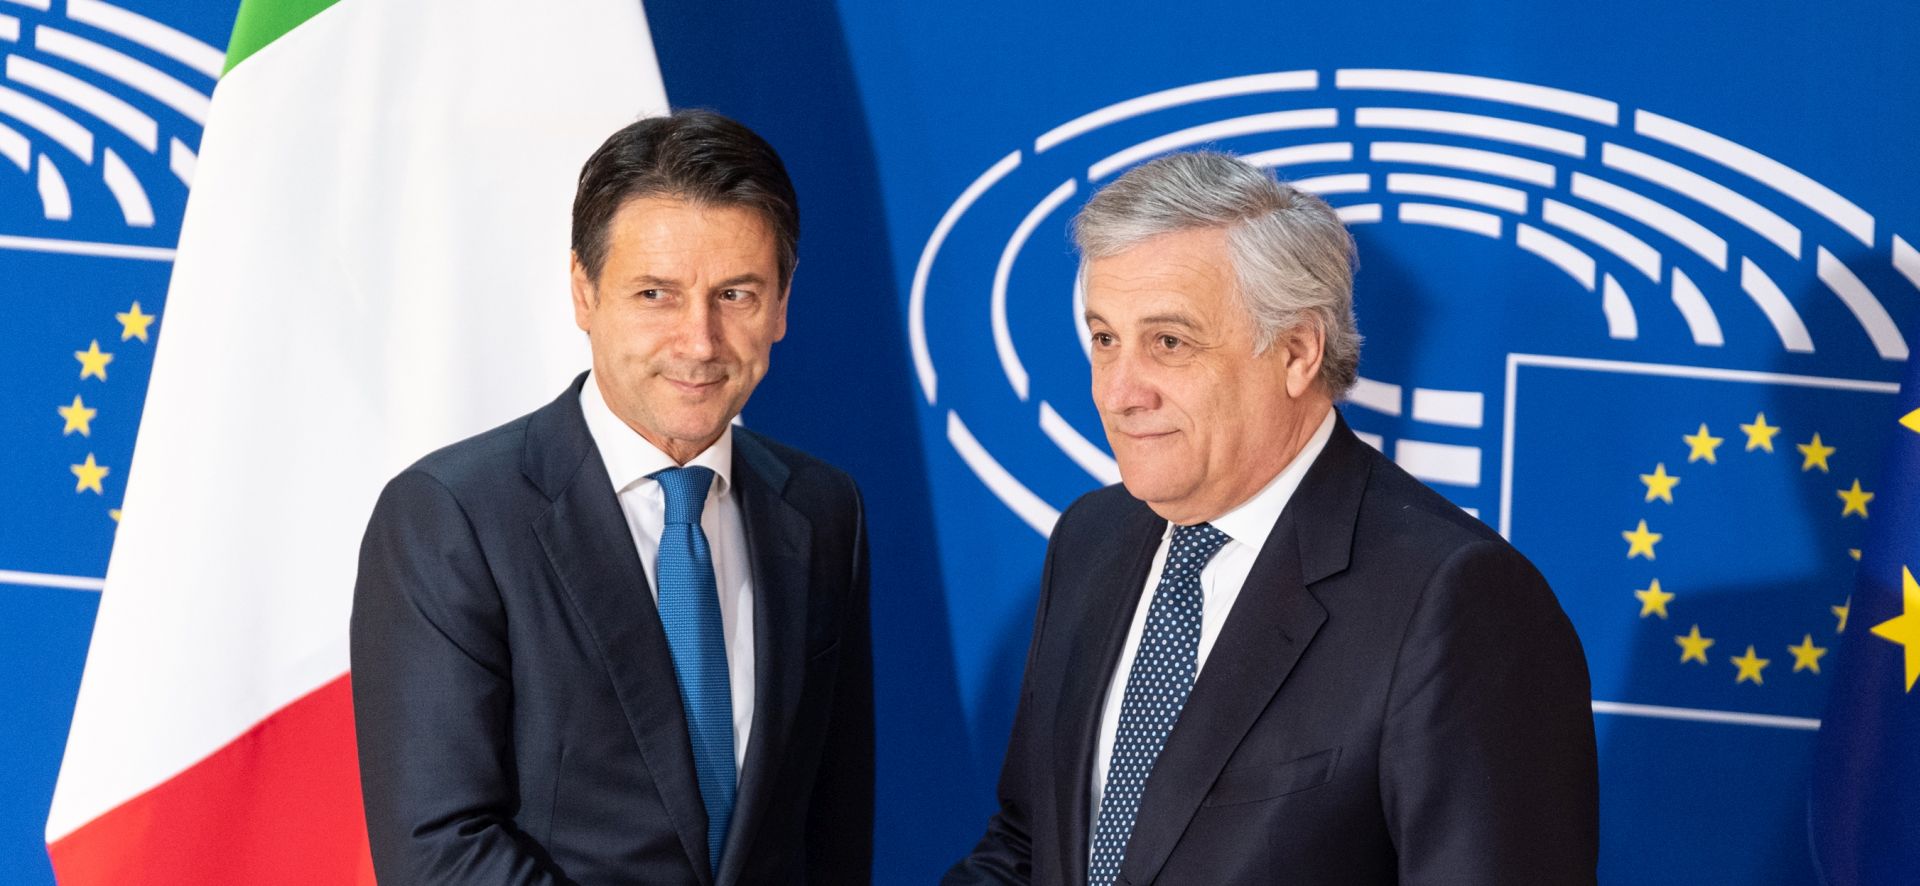 epa07364545 Italian Prime Minister Giuseppe Conte (L) is welcomed by Antonio Tajani (R), President of the European Parliament, at the European Parliament in Strasbourg, France, 12 February 2019. Conte debates on the Future of Europe.  EPA/PATRICK SEEGER